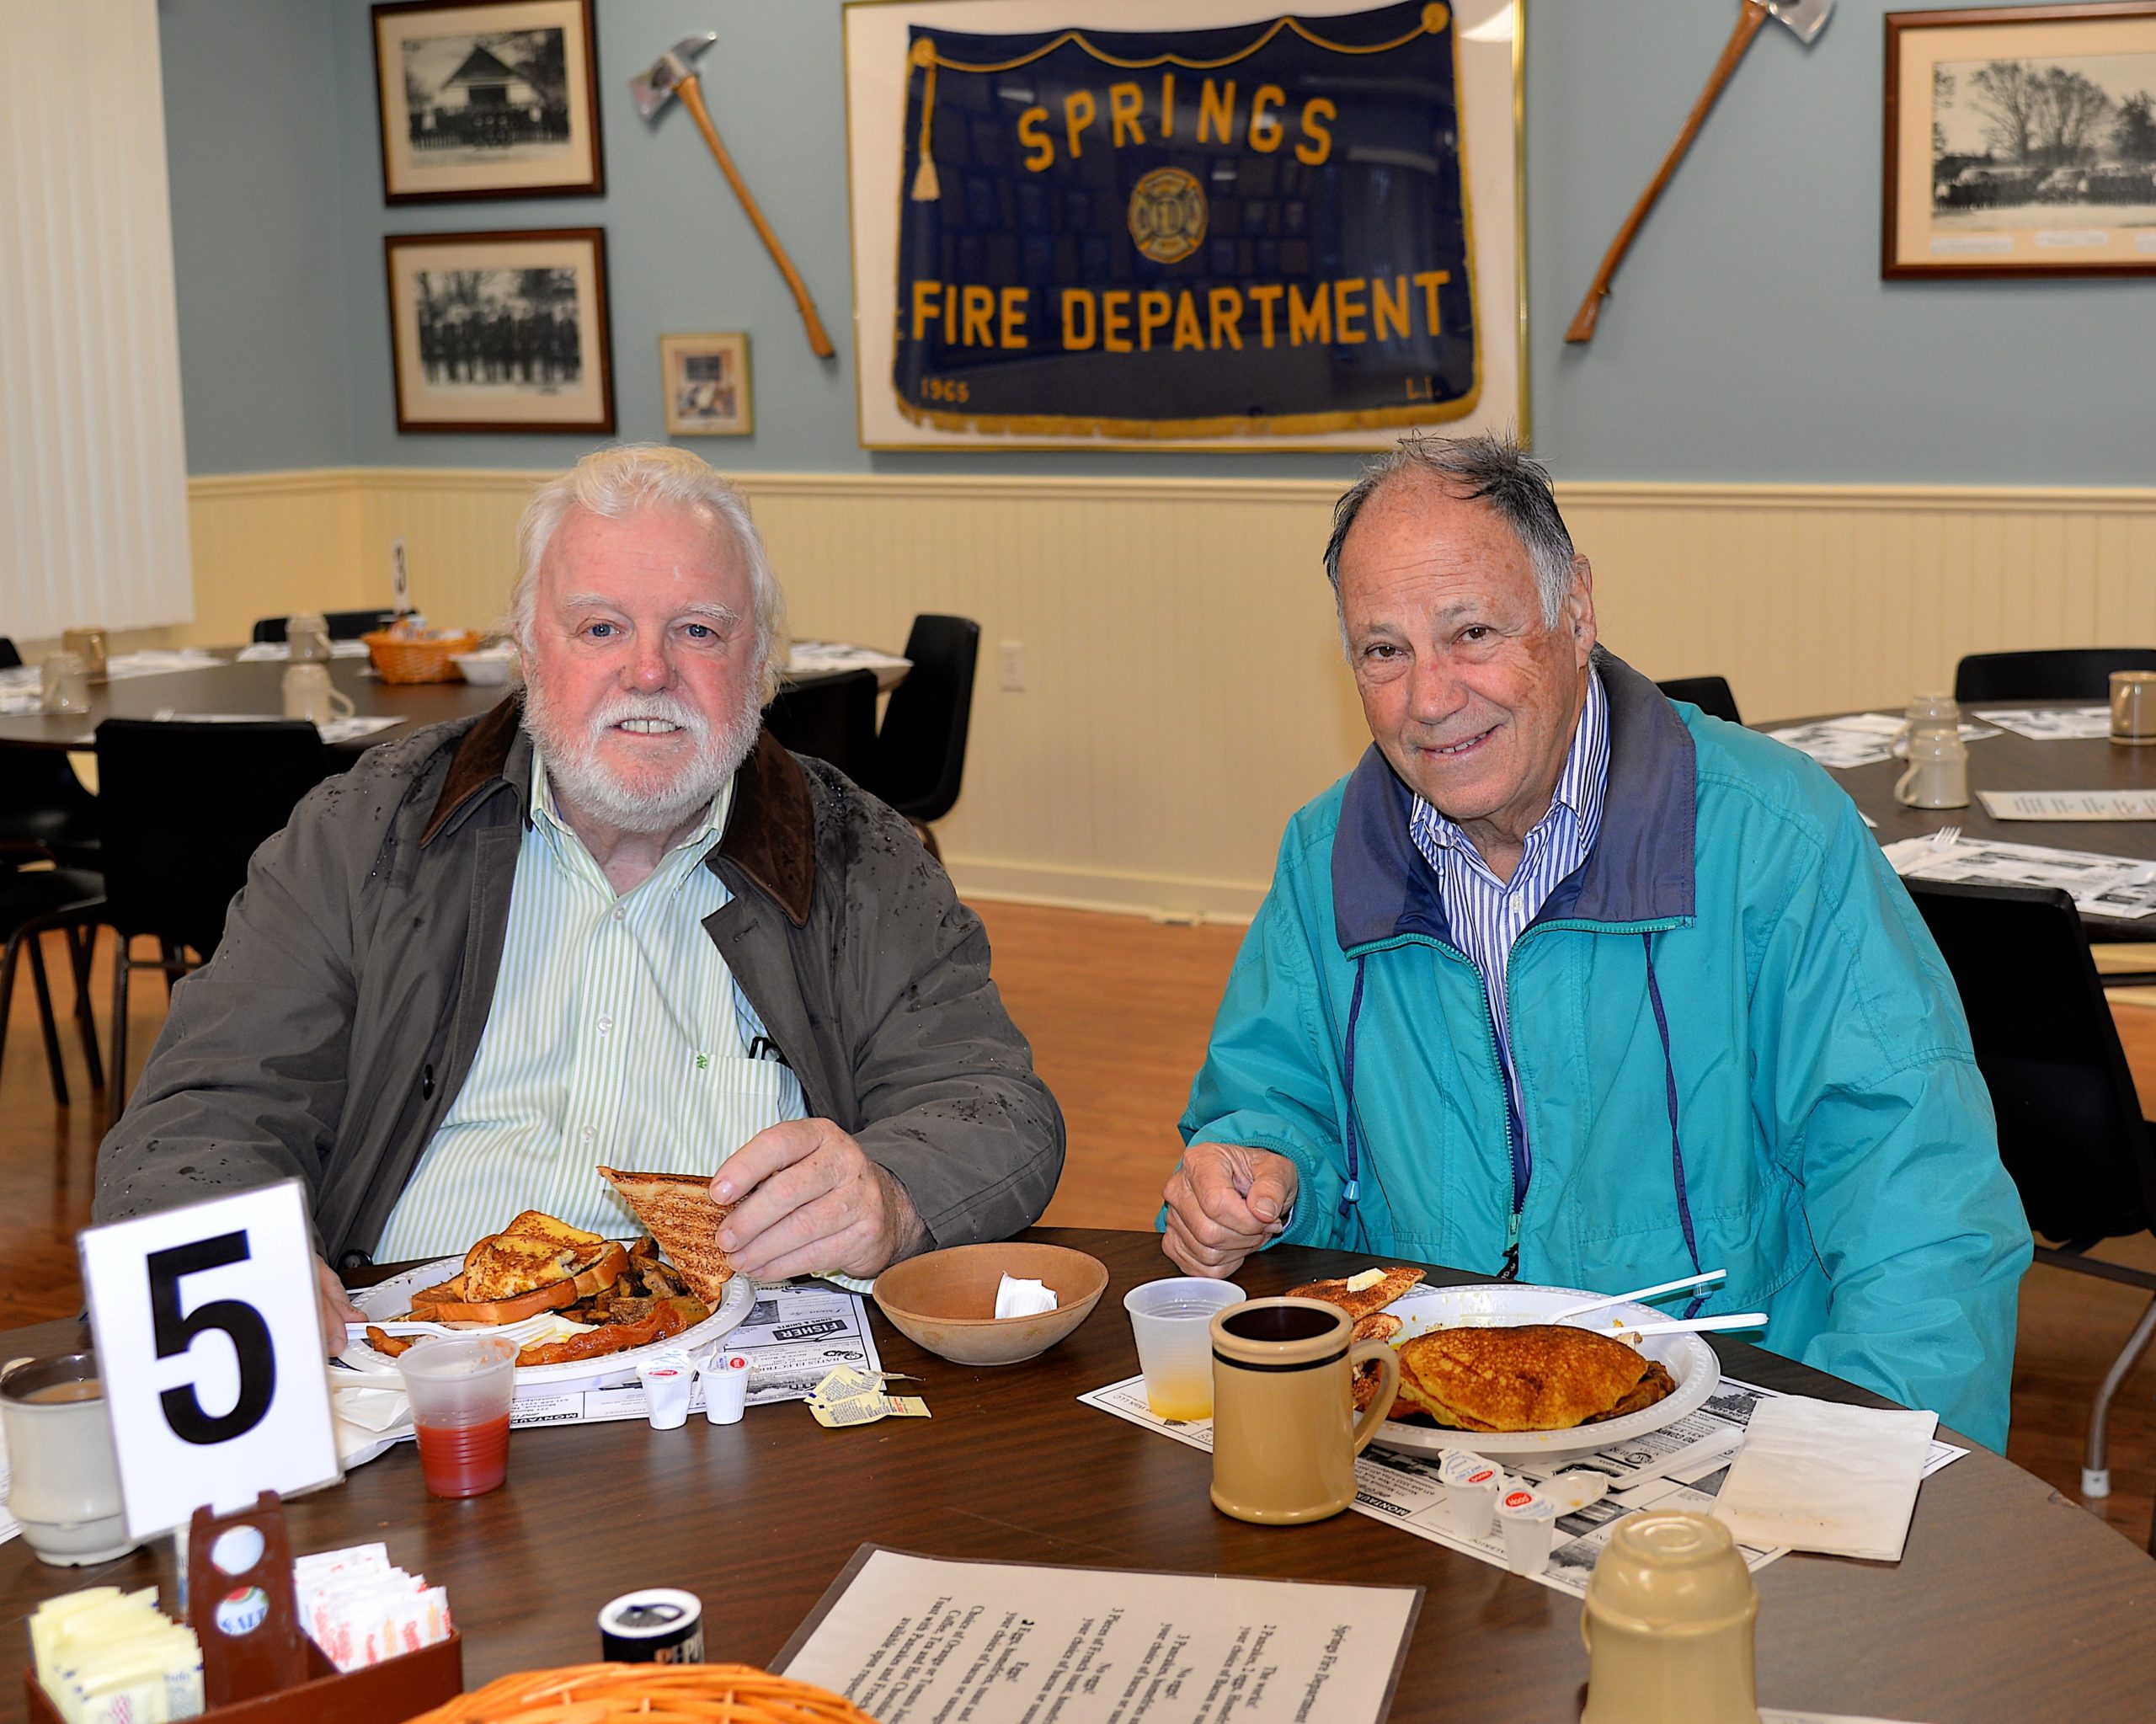 The Springs Fire Department held a pancake breakfast on  Sunday and Russ and Michael Bassett turned out for the fare. KYRIL BROMLEY